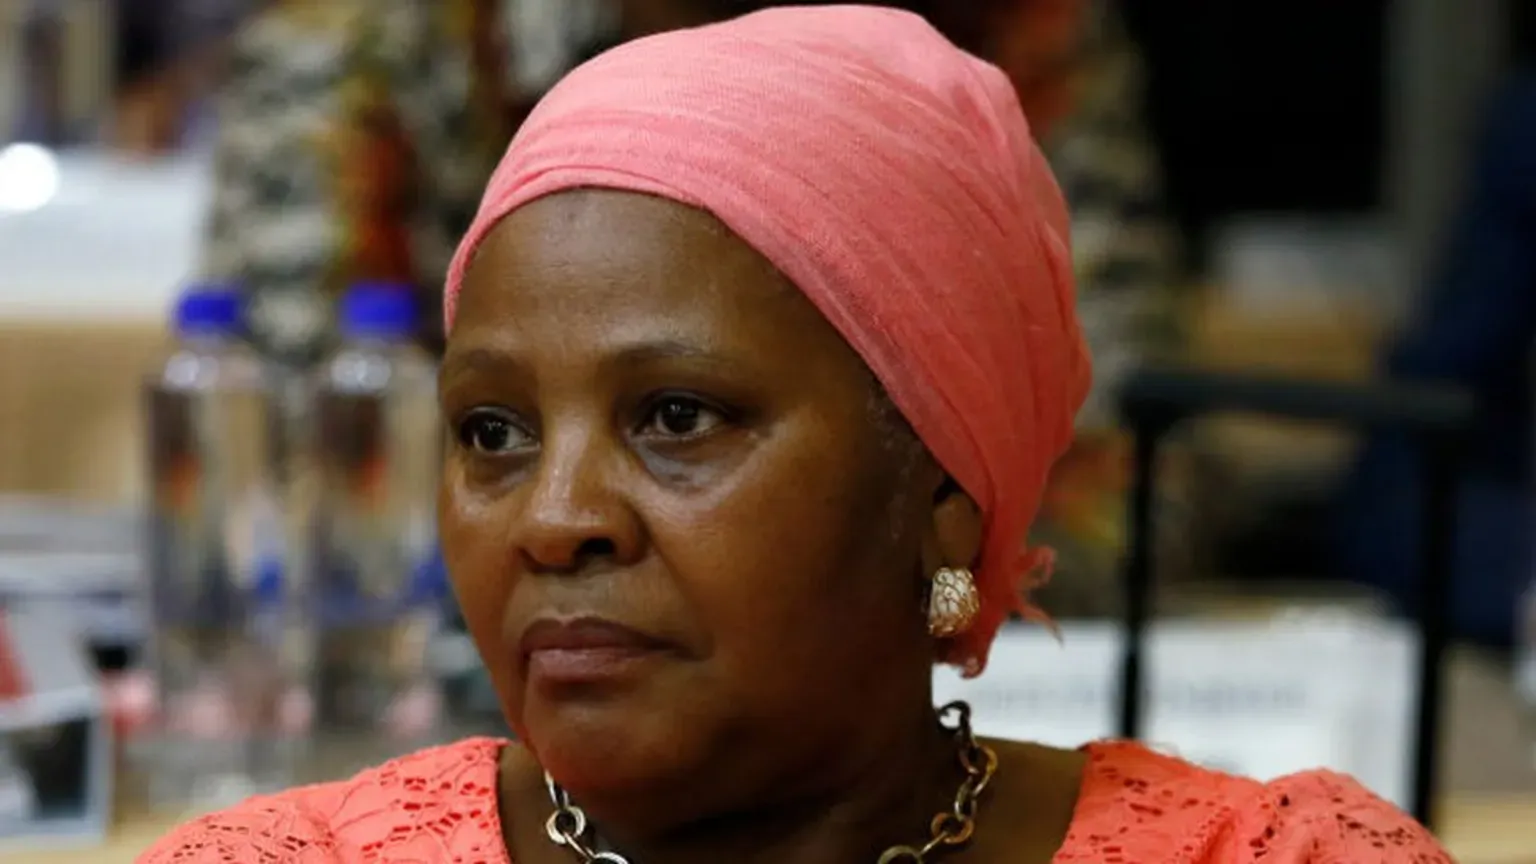 South African Speaker Delivers Herself to Police for Arrest Over Corruption Charges